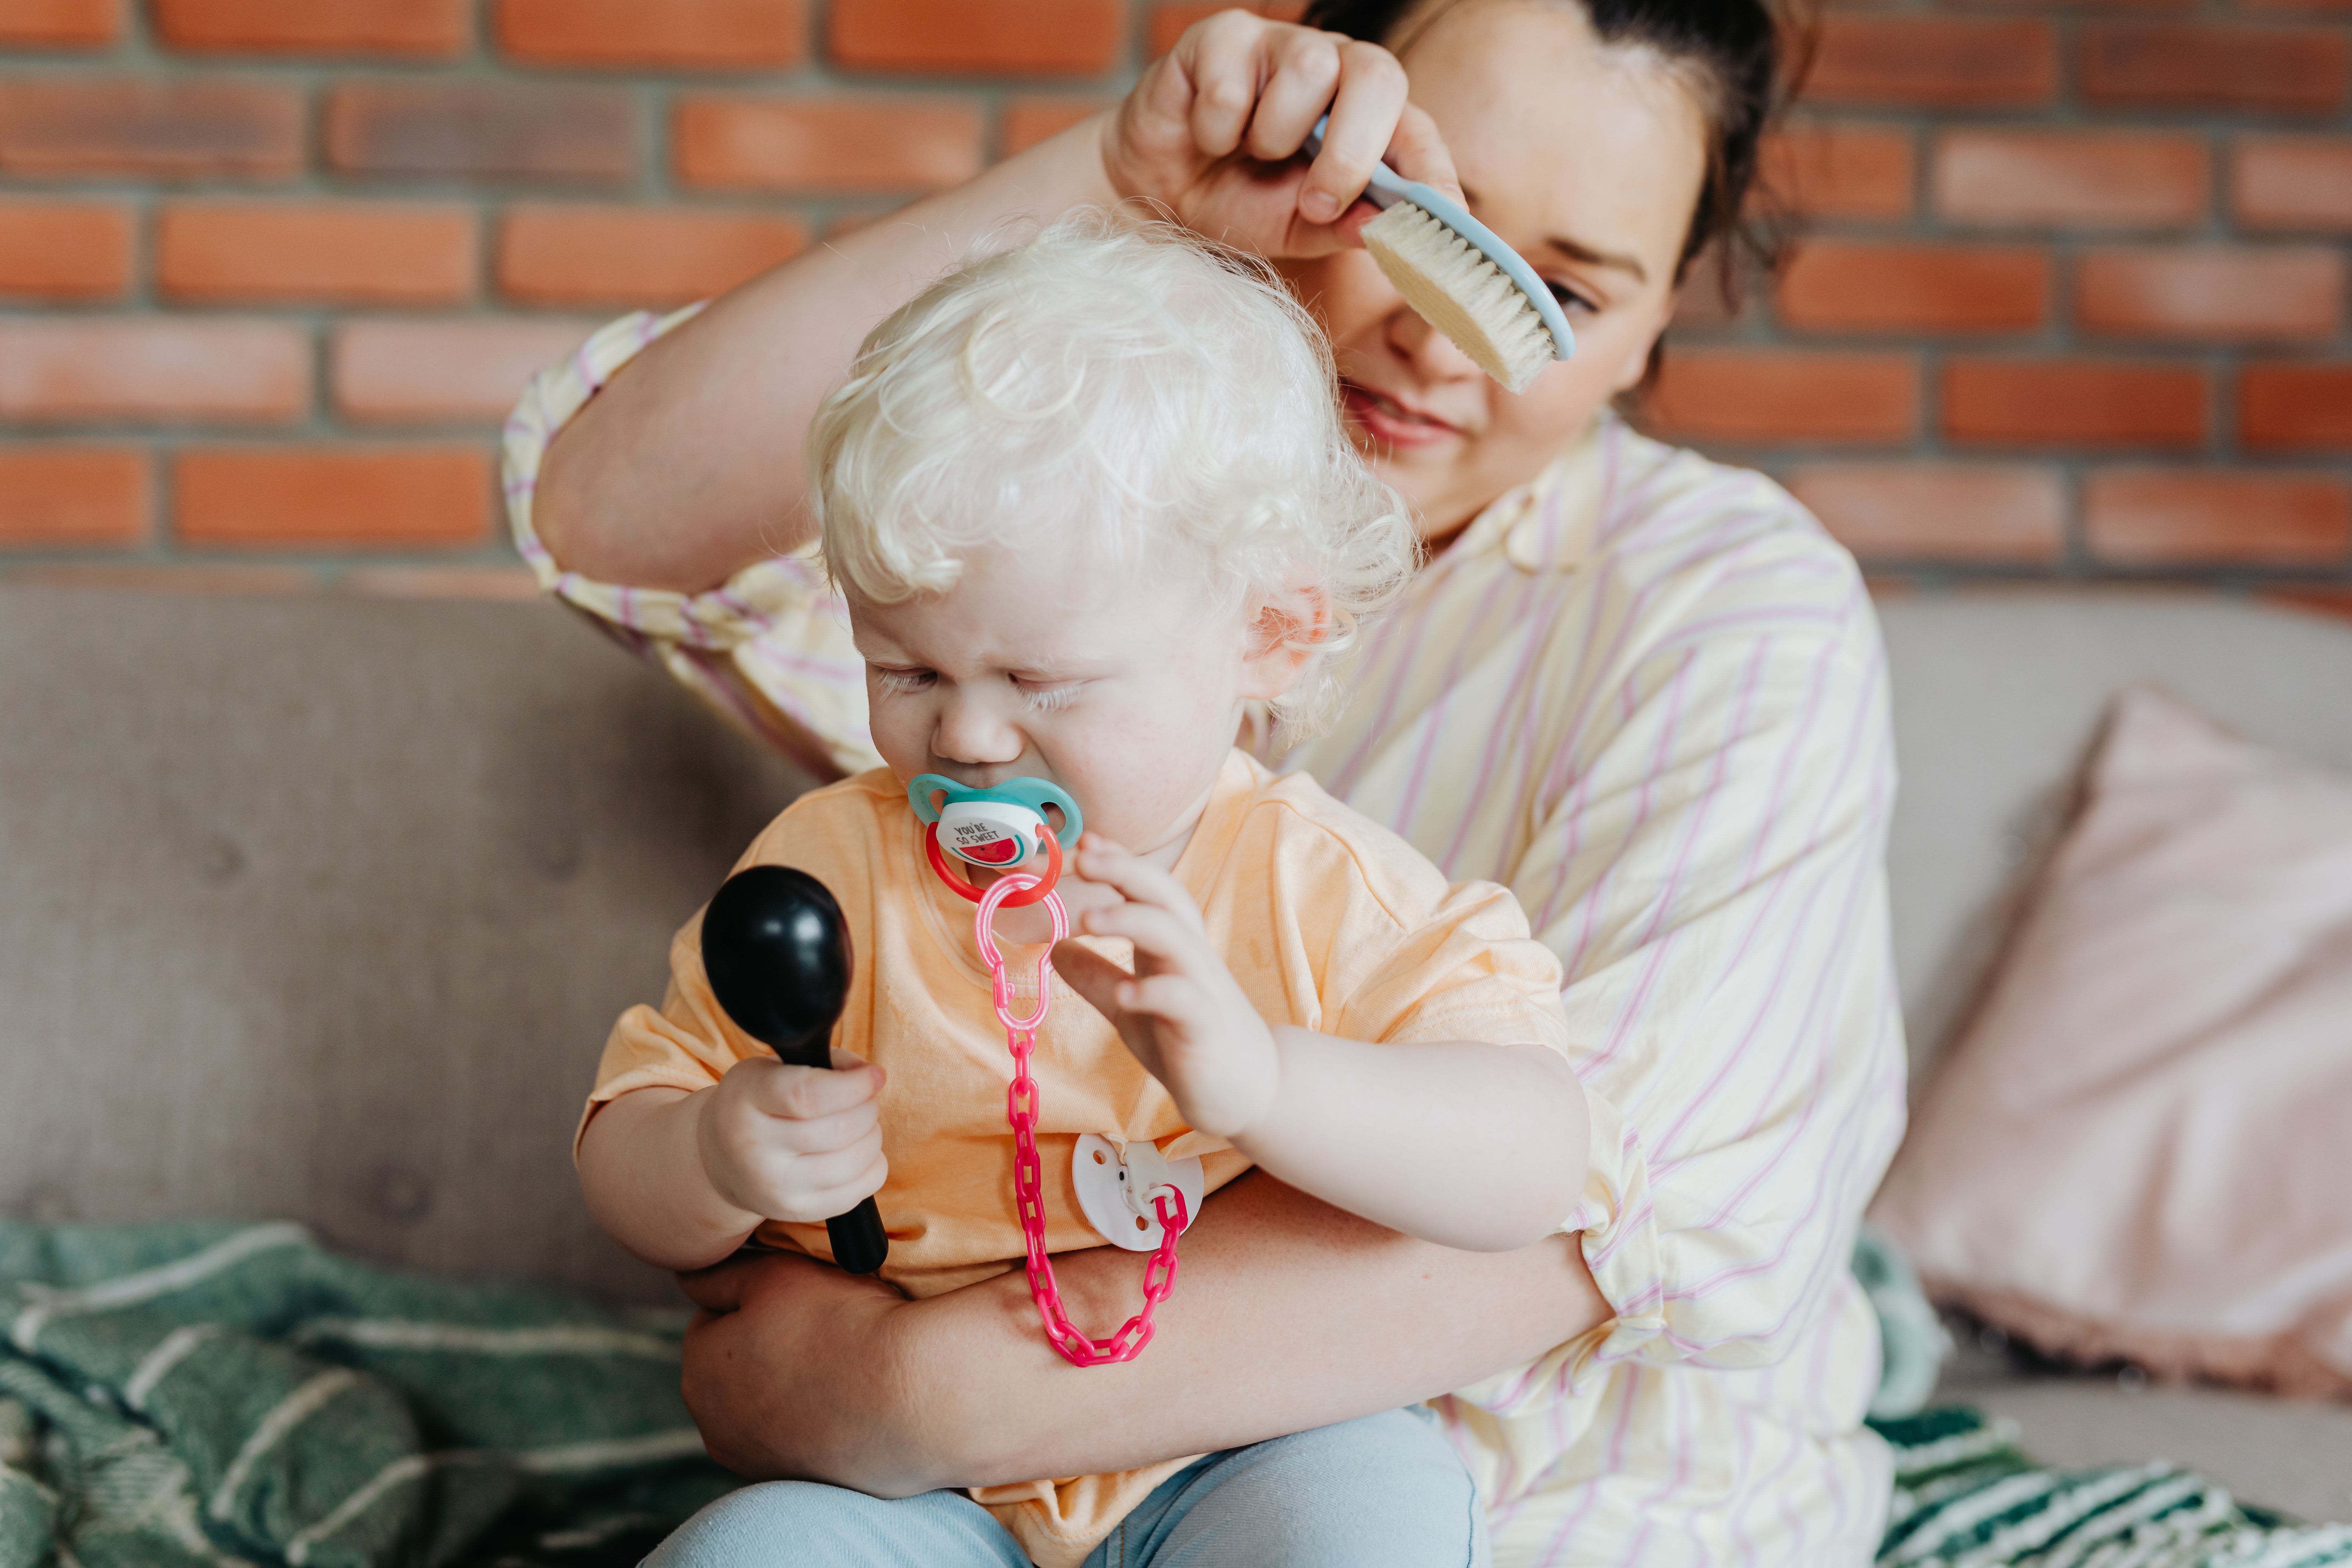 Mom caring for her child | Source: Pexels